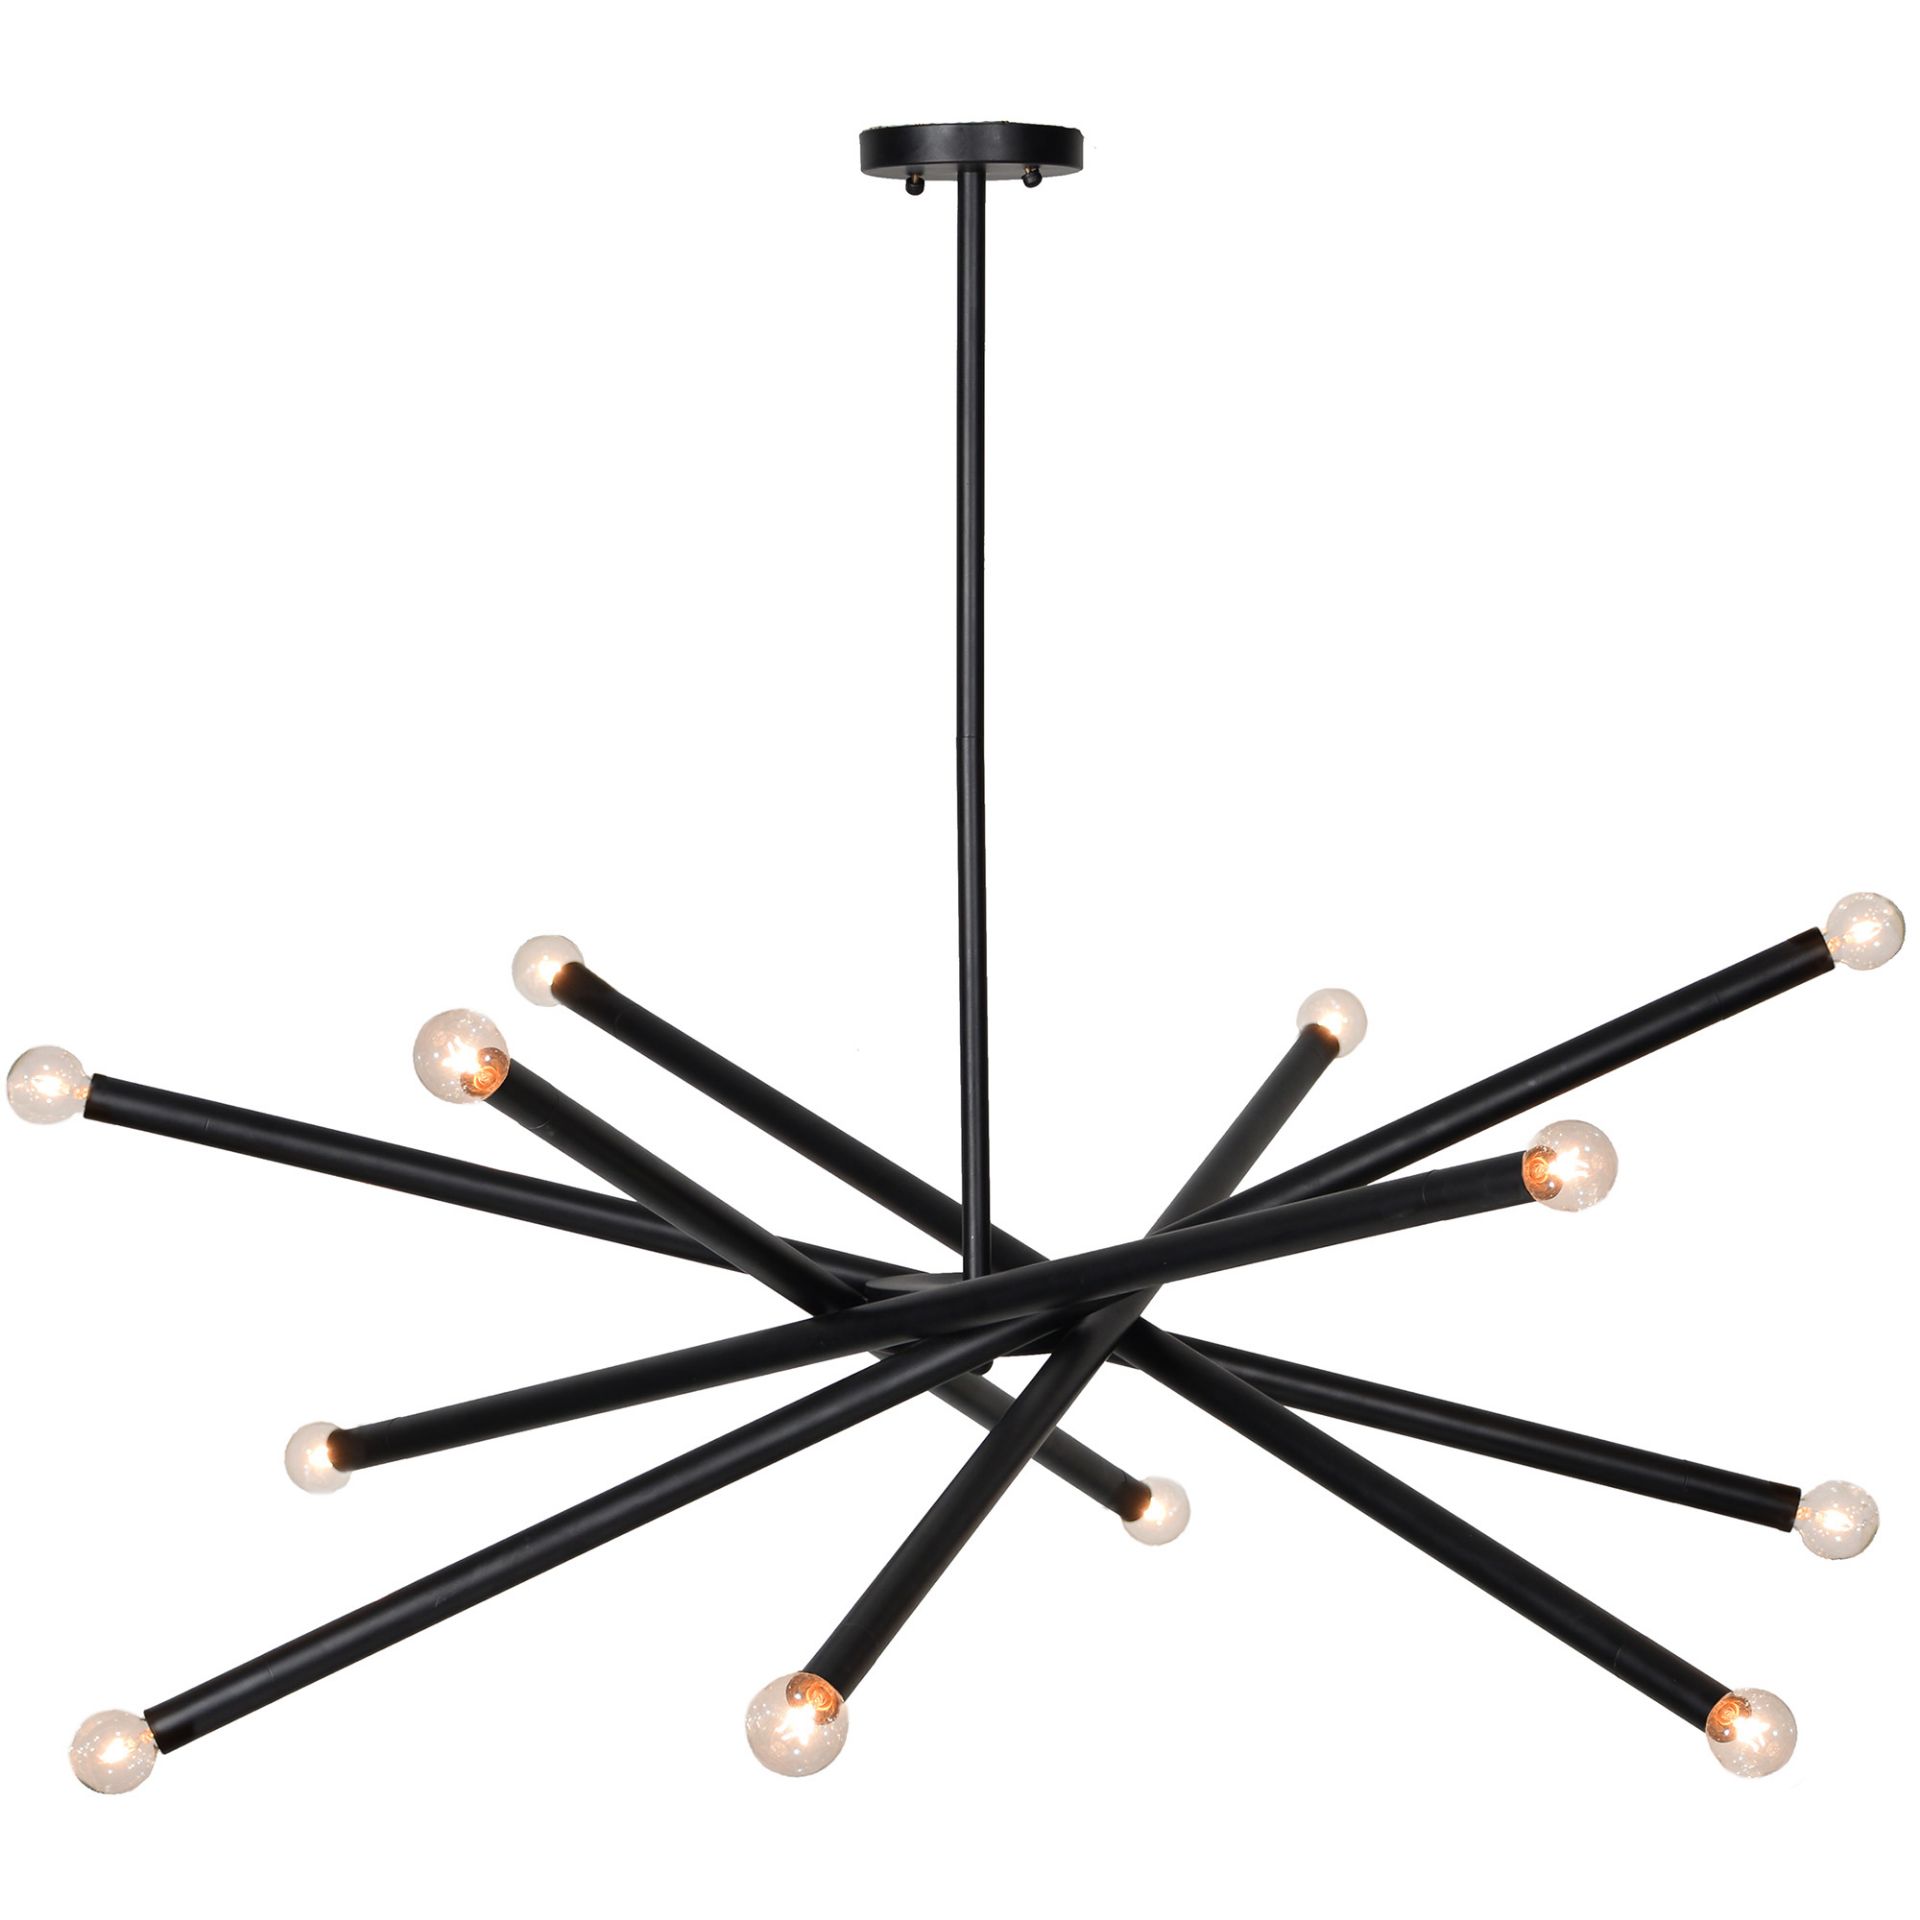 Clemente Ceiling Light Fixture - matte black - Retail Value: $1,000 - Donated By: Grubb Engineering